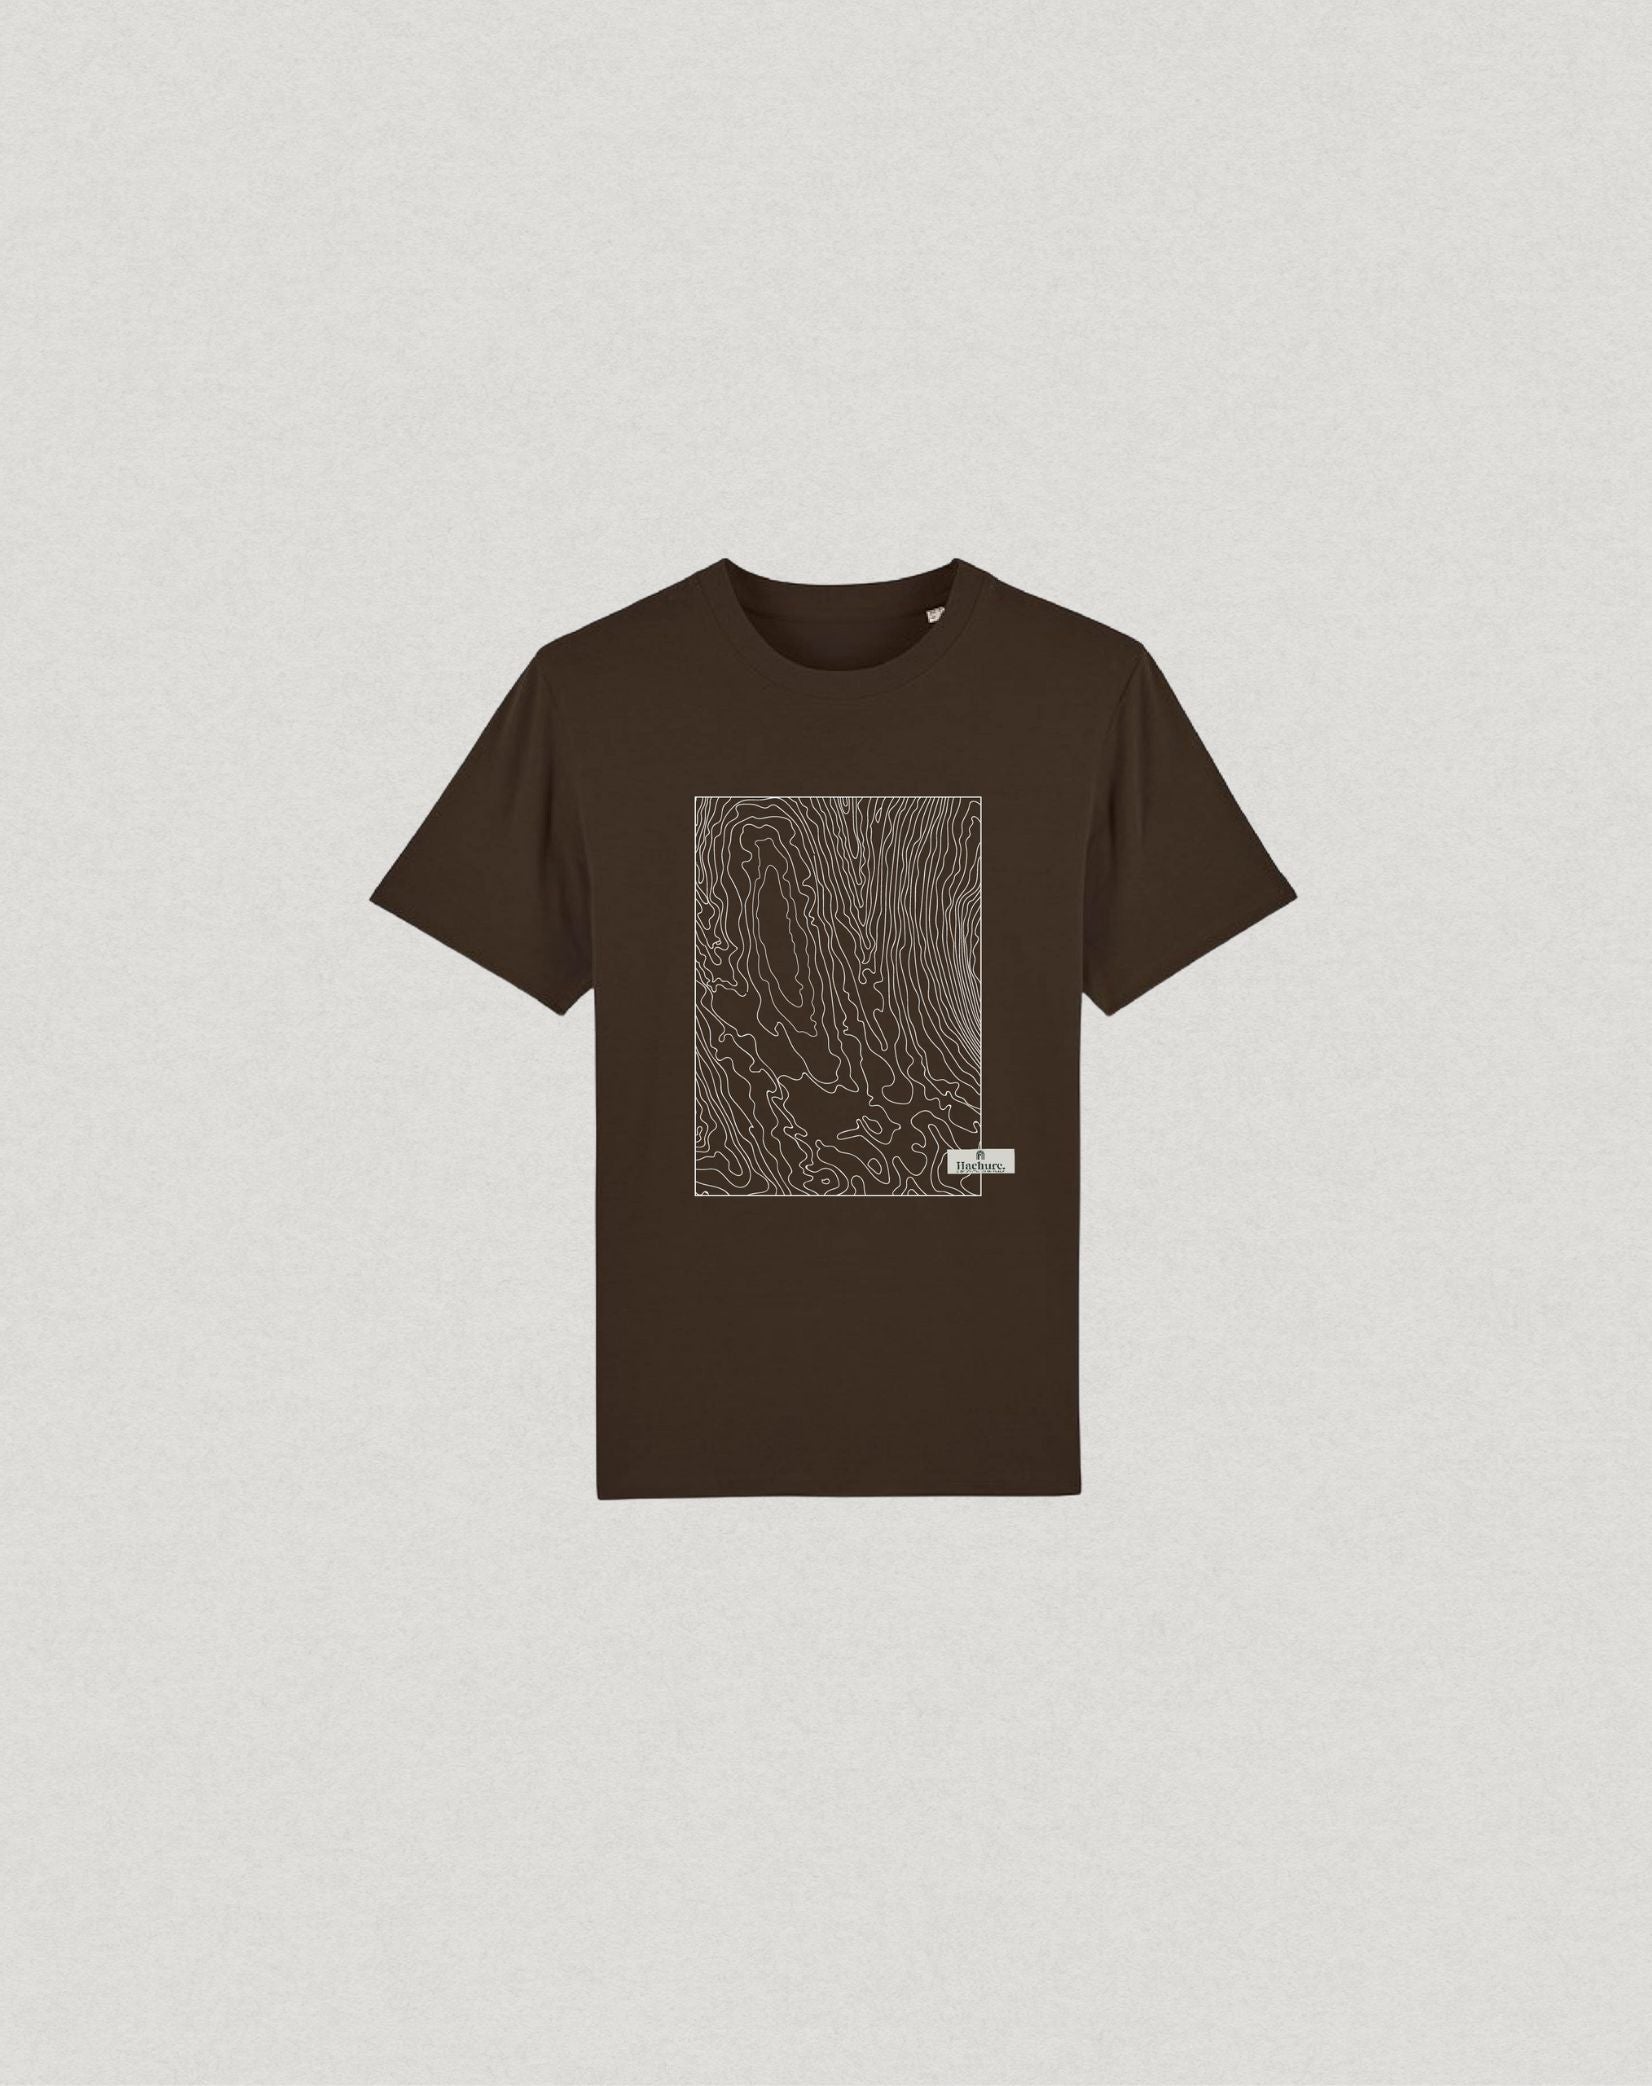 Hachure brown t-shirt with white hachure print on the front